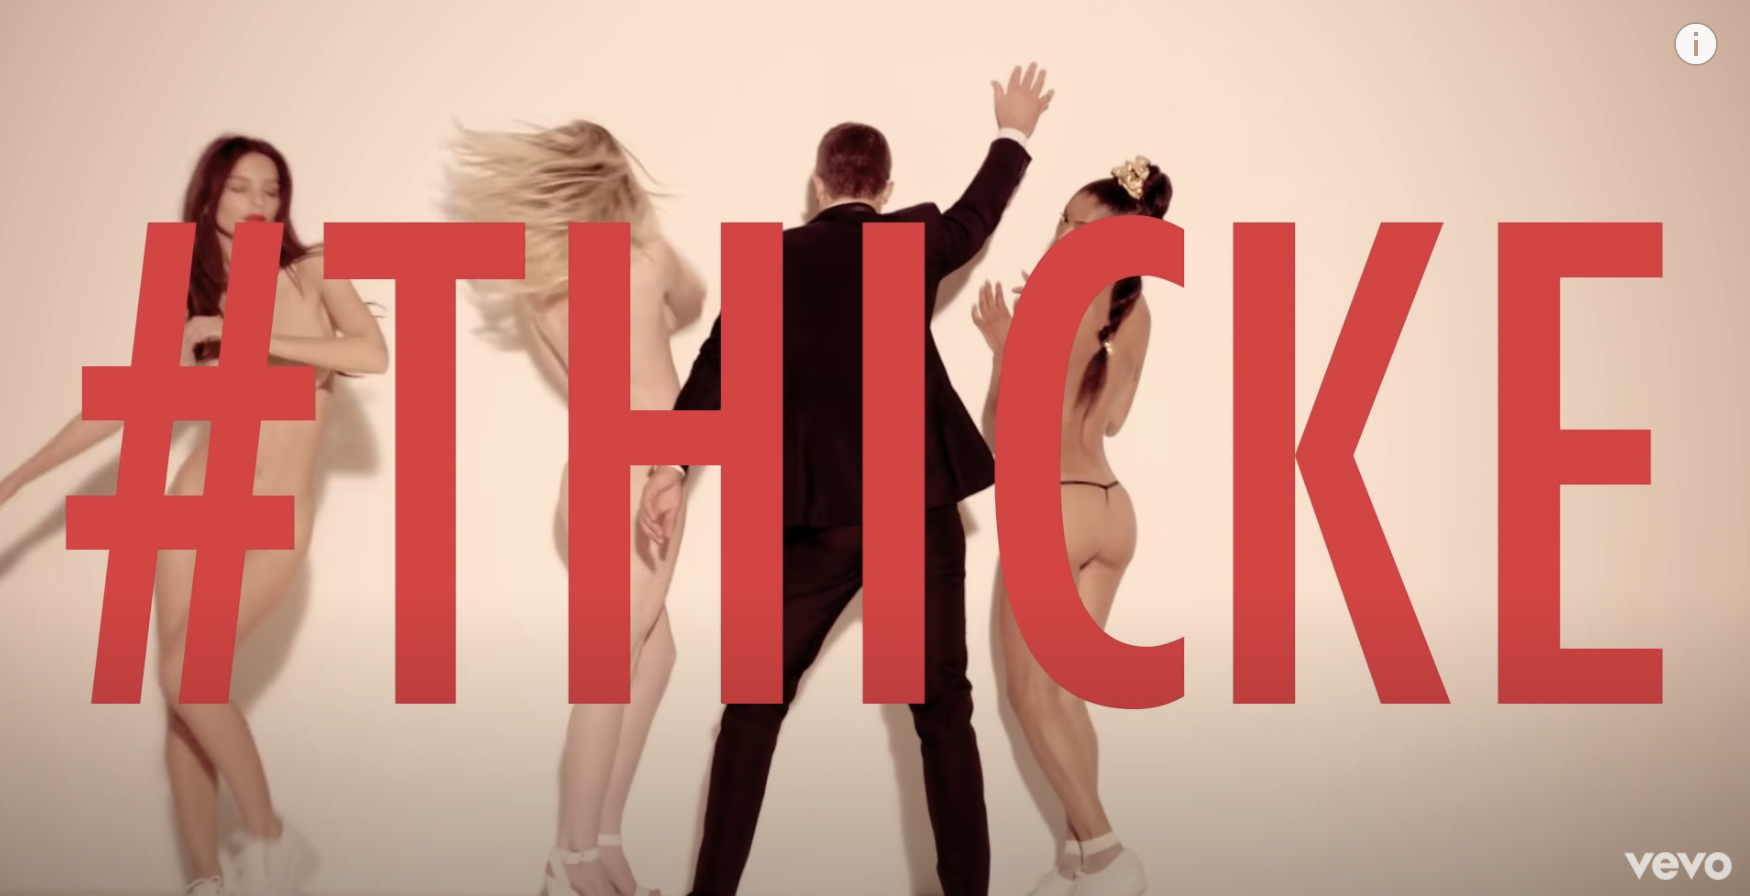 Robin Thicke Blurred Lines Models